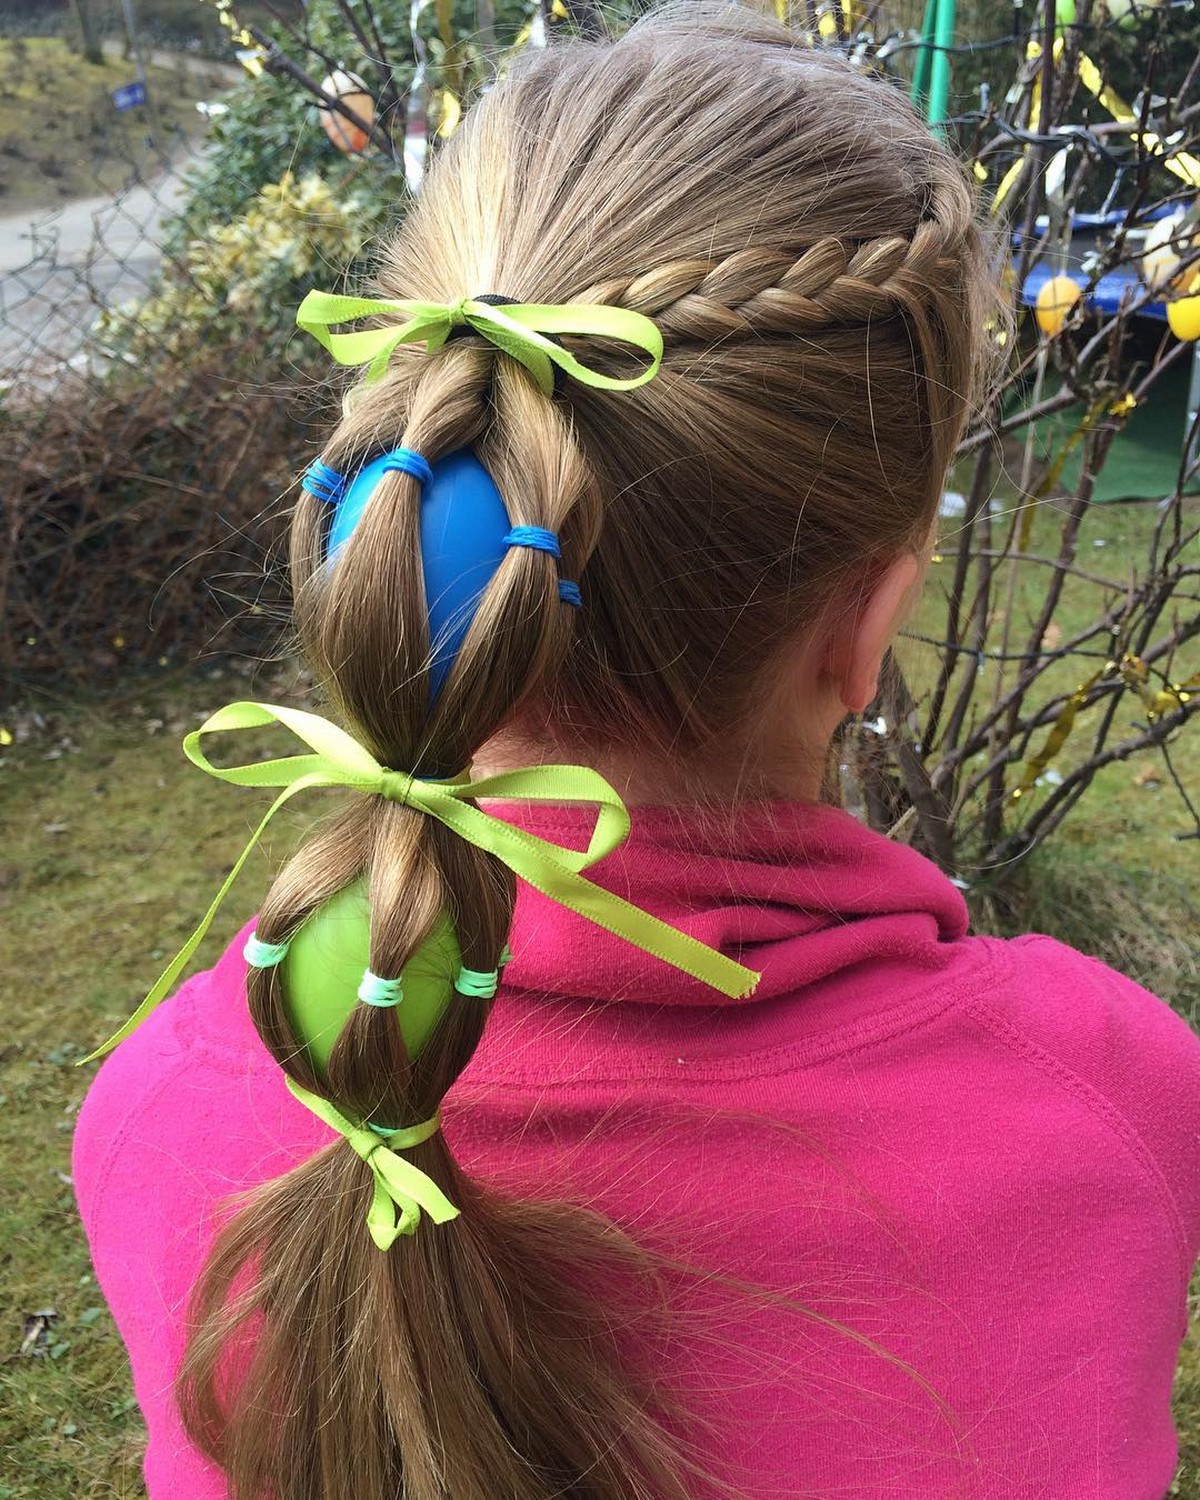 Your kids' most outrageous (and awesome) iso hairstyles | Kidspot